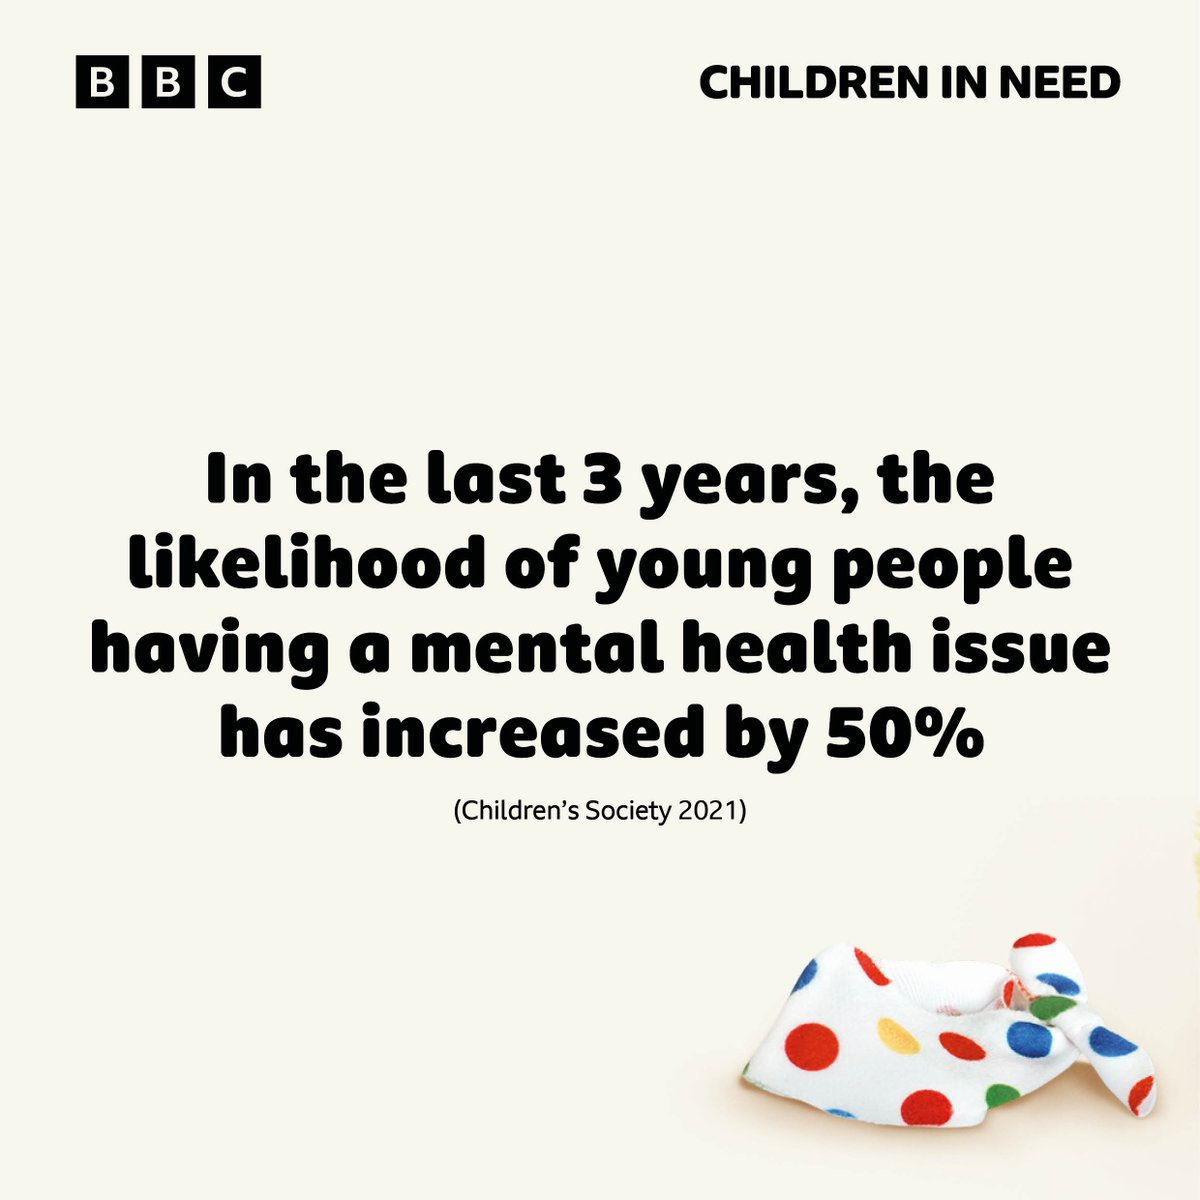 We believe serious mental health issues in children can be prevented with early help, which starts with the right conversations between young children & their family, friends & other trusted adults. Find out more about our 'Behind the Bandana' campaign bbc.co.uk/pudsey